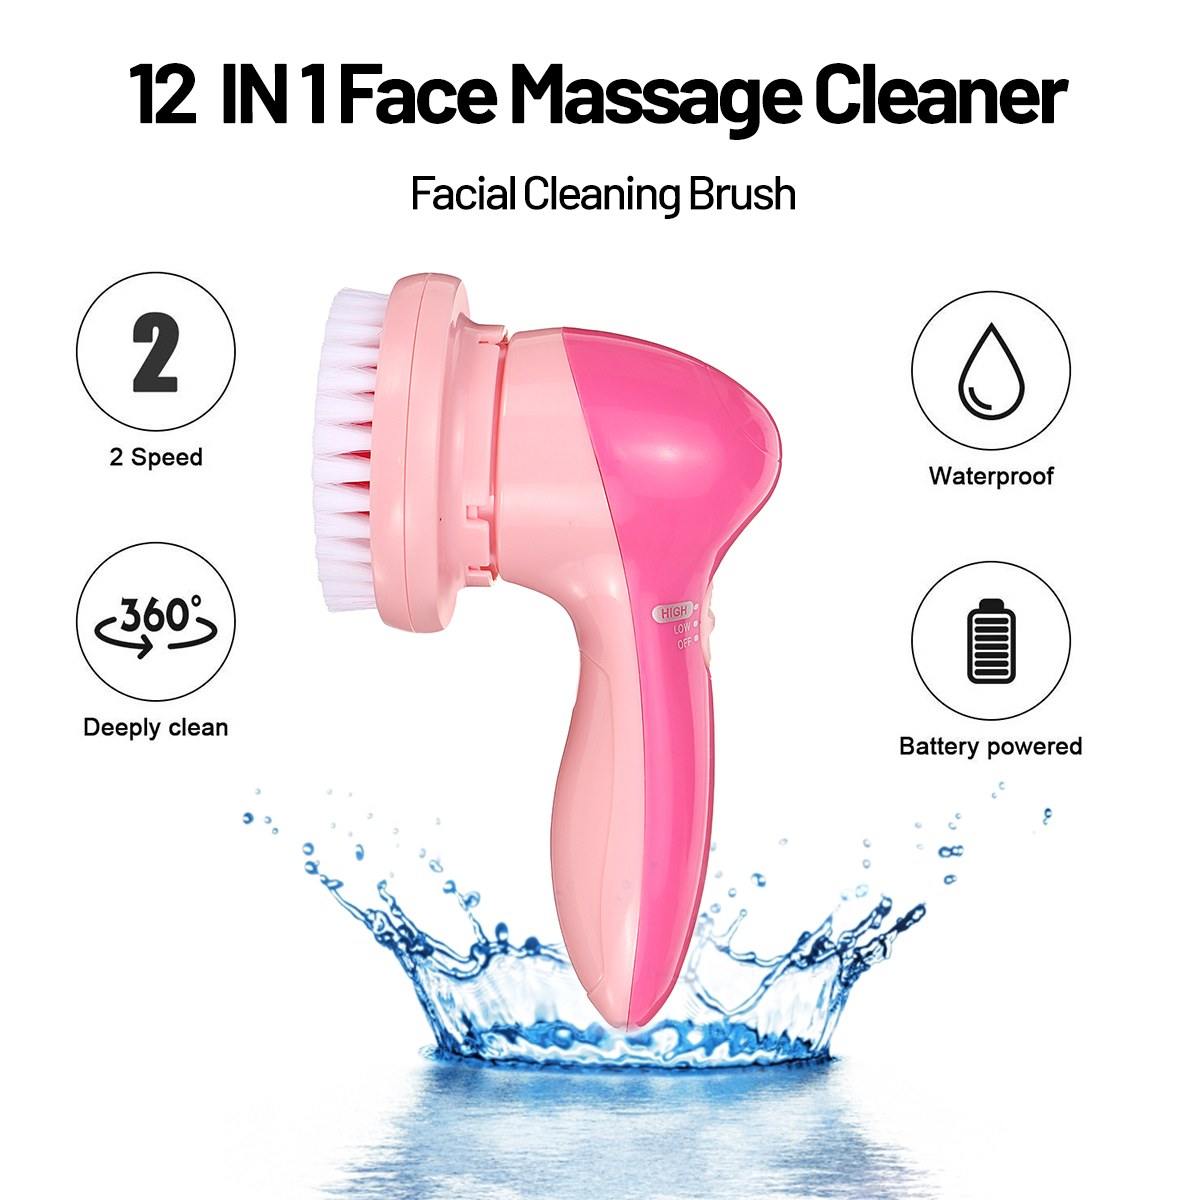 12-in-1-Electric-Facial-Cleaning-Brush-Wash-Face-Nose-Skin-Pore-Cleaner-Body-Massage-Beauty-Machine-1687416-2